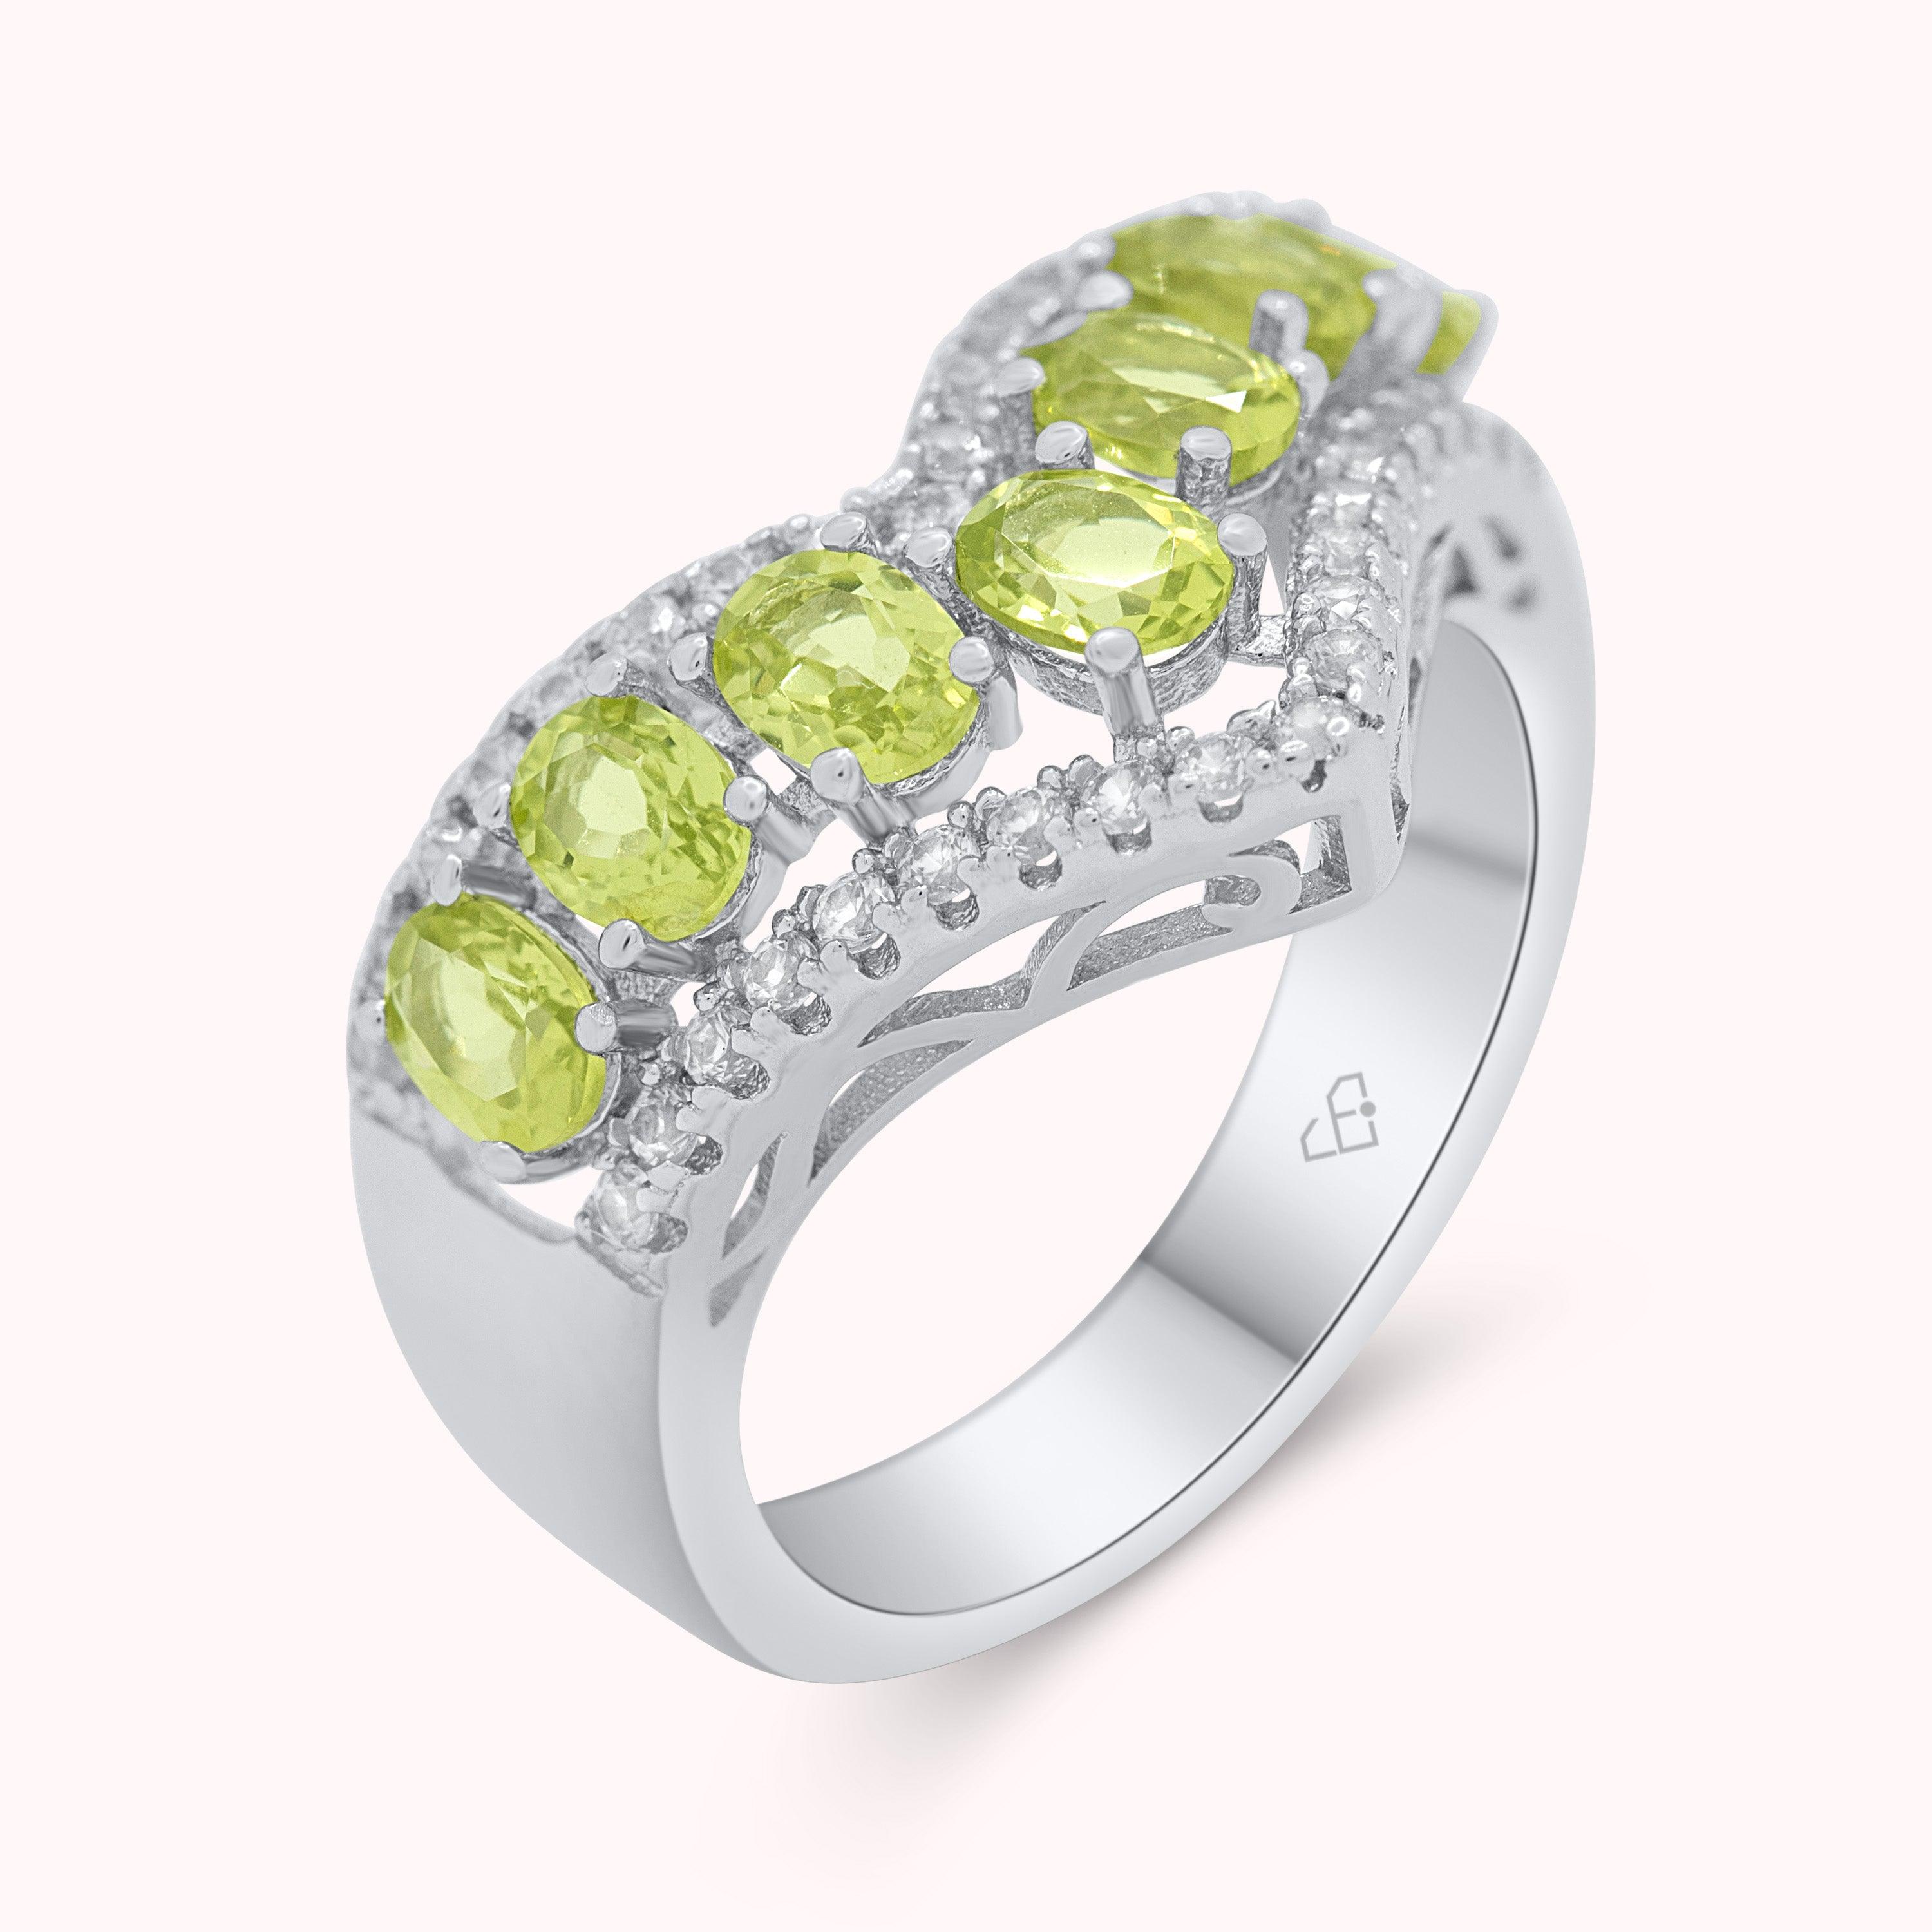 Elegant Natural Green Peridot and Zircon Gemstones Sterling Silver Ring, August Birthstone Trendy Gift, Daily Unique Design